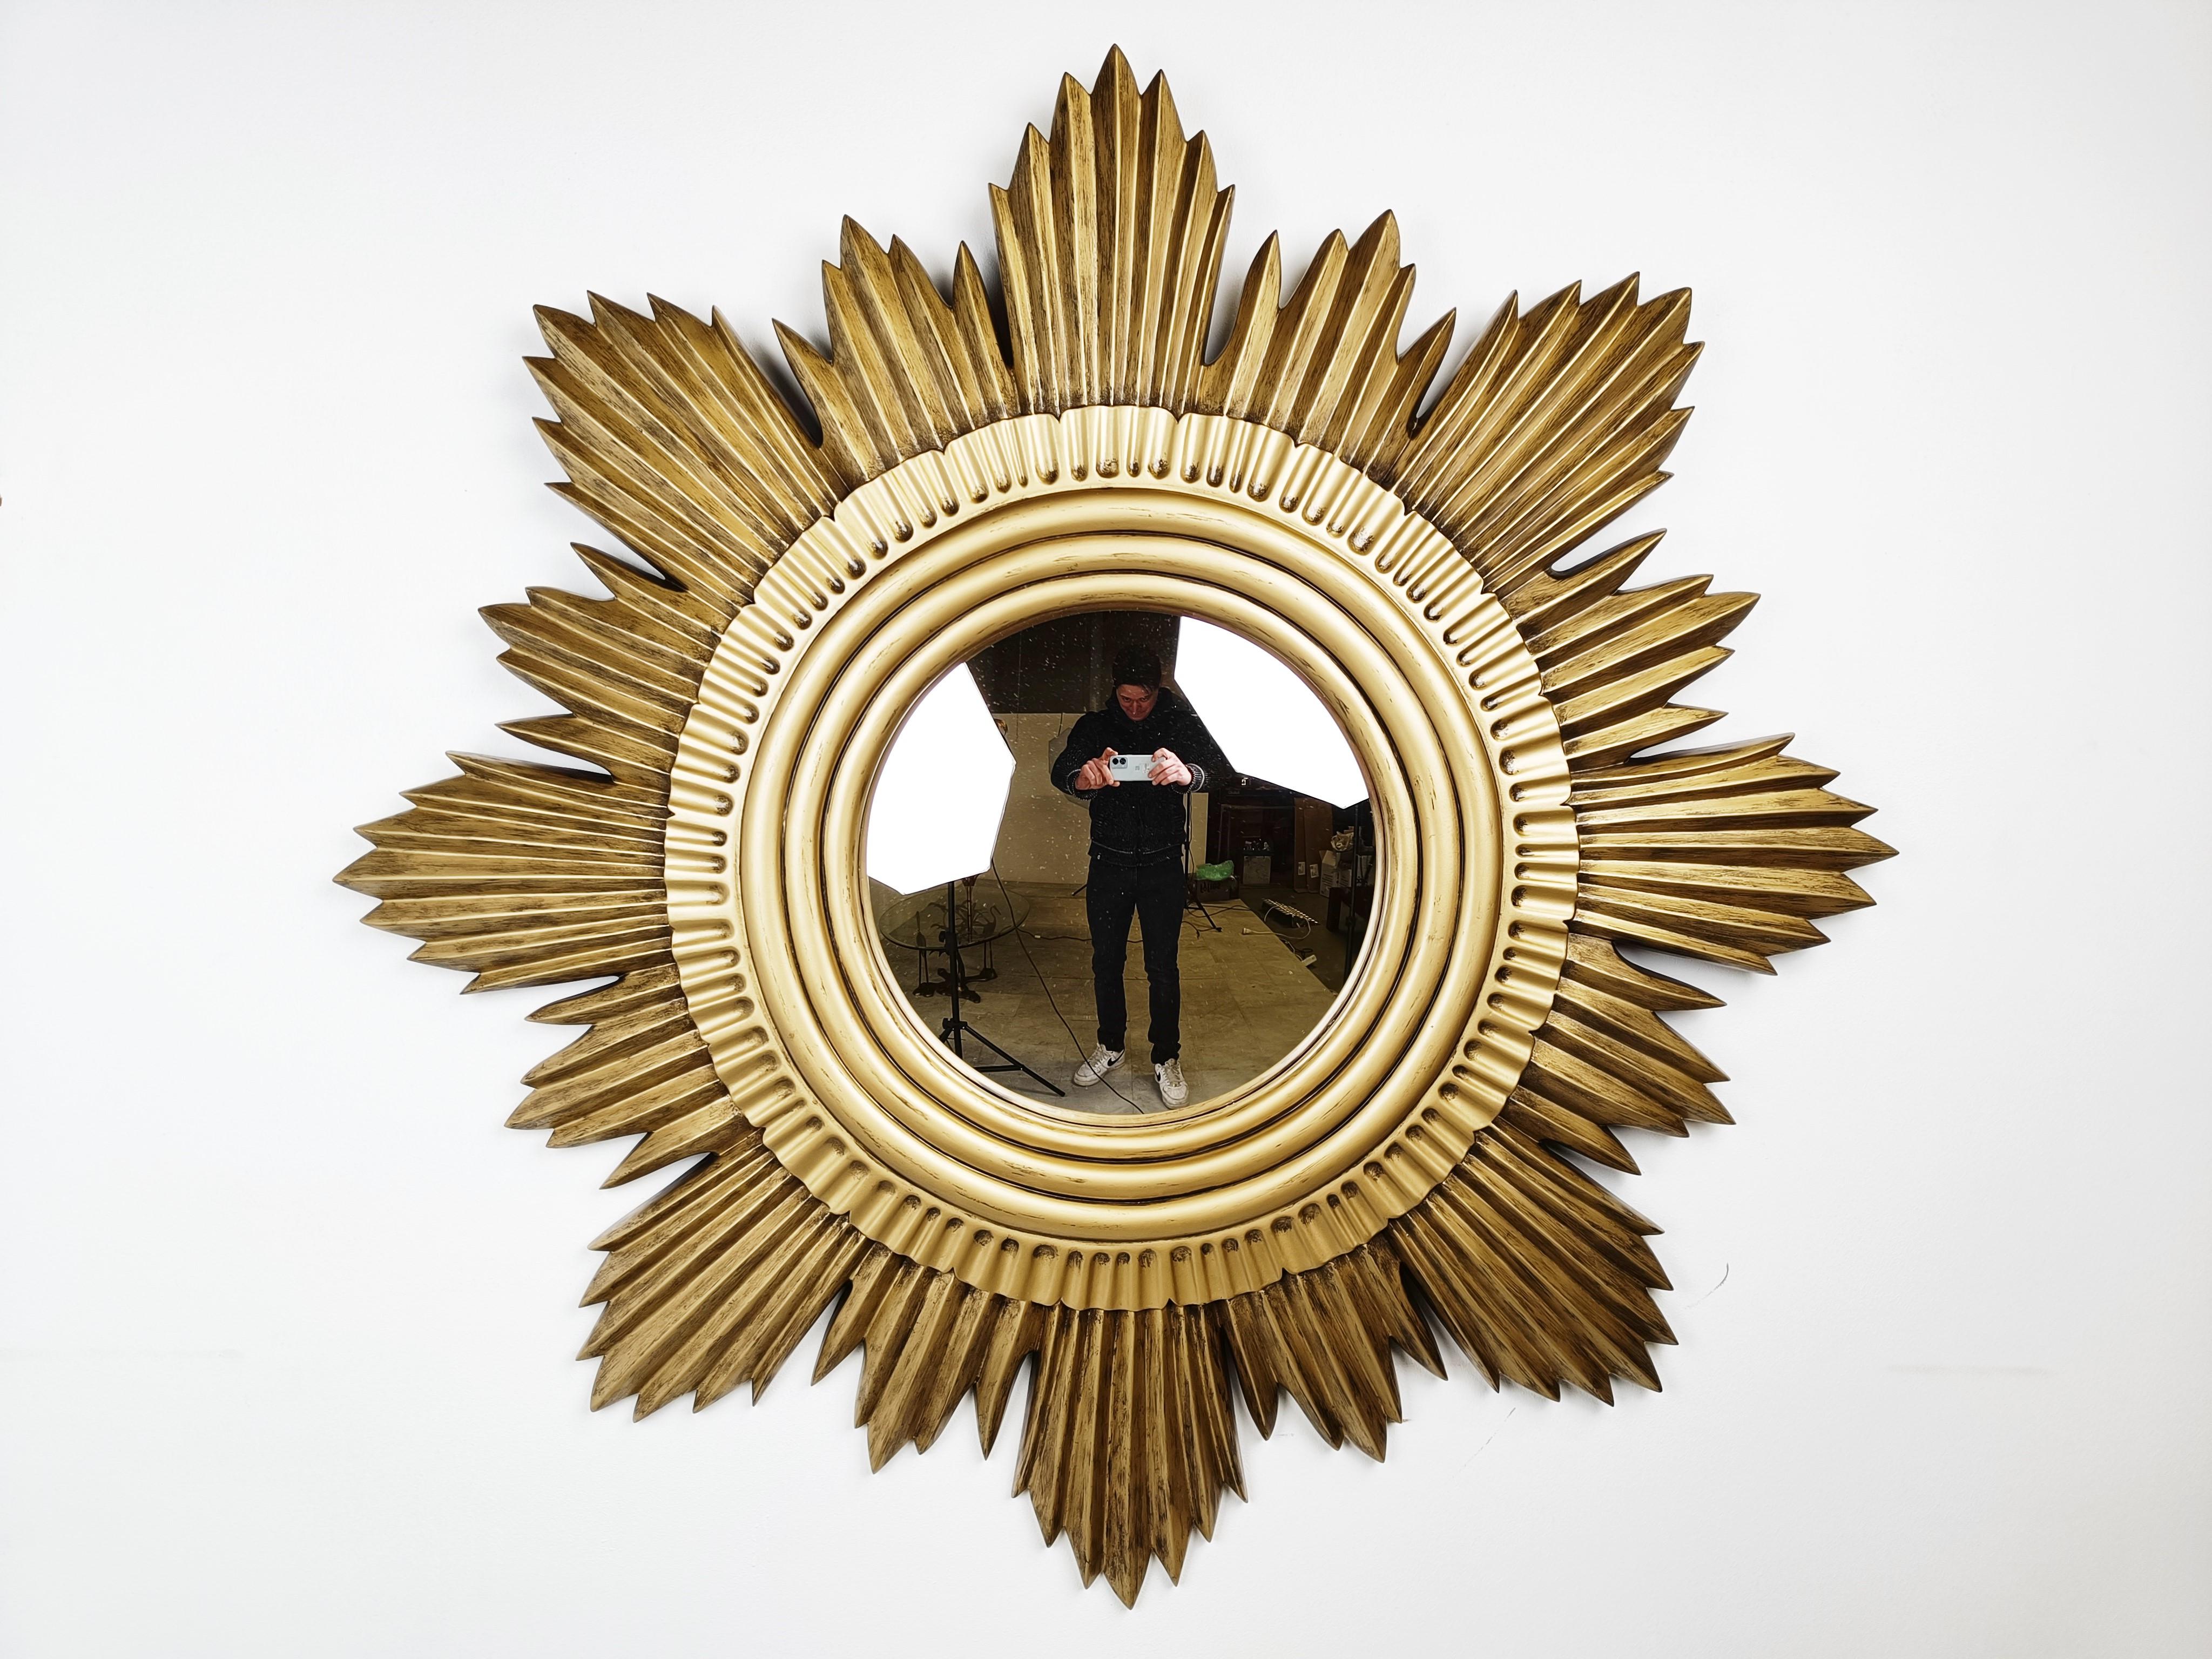 Extra large gilded resin sunburst mirror with convex mirror glass.

Spectacular size, 120cm!!

Good condition.

1960s - made in Belgium.

Dimensions:
Diameter: 120cm/47.24